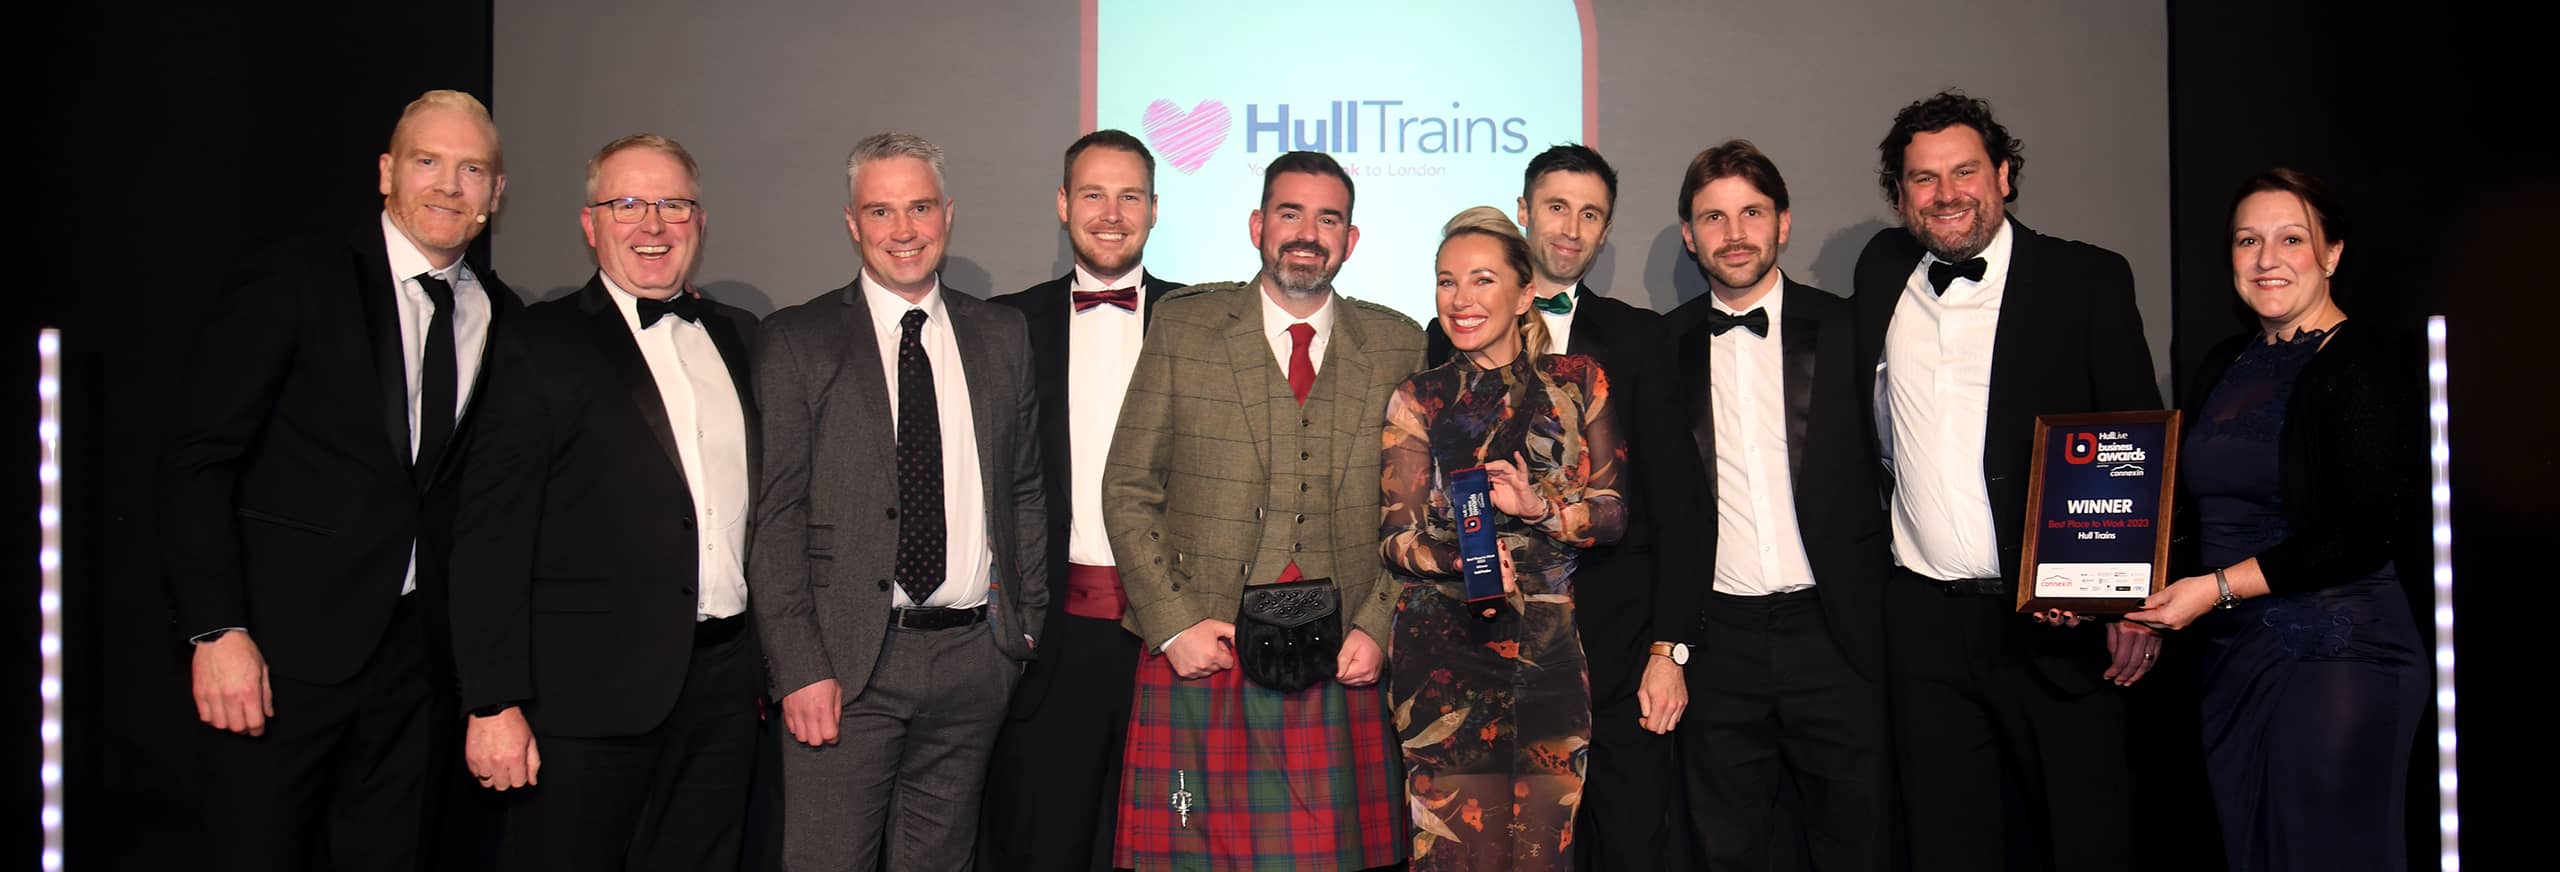 Hull Trains team accepting the Best Place to Work award at HullLive Business Awards